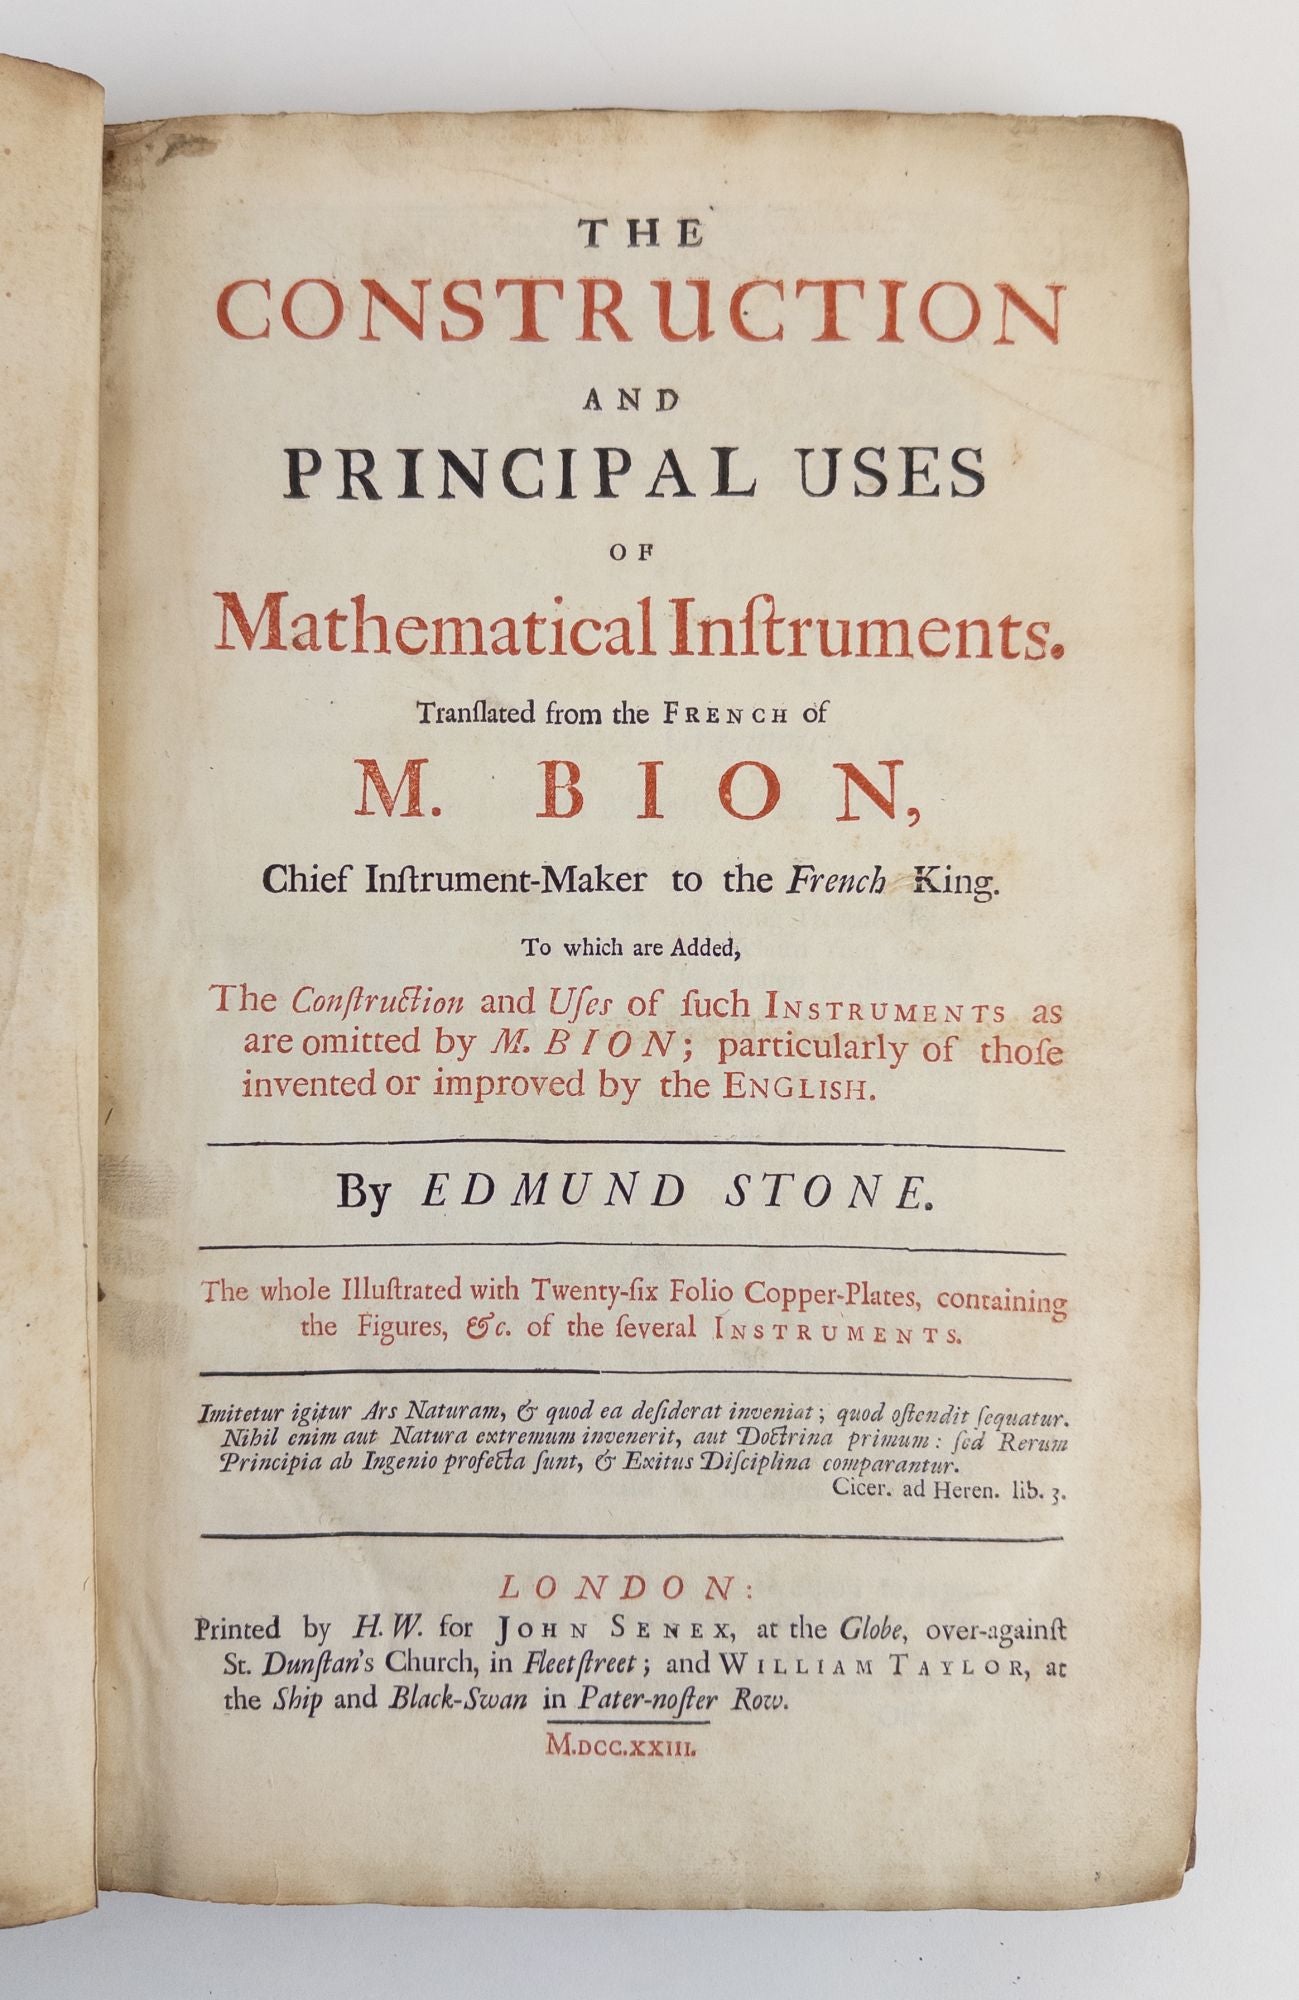 Product Image for THE CONSTRUCTION AND PRINCIPAL USES OF MATHEMATICAL INSTRUMENTS